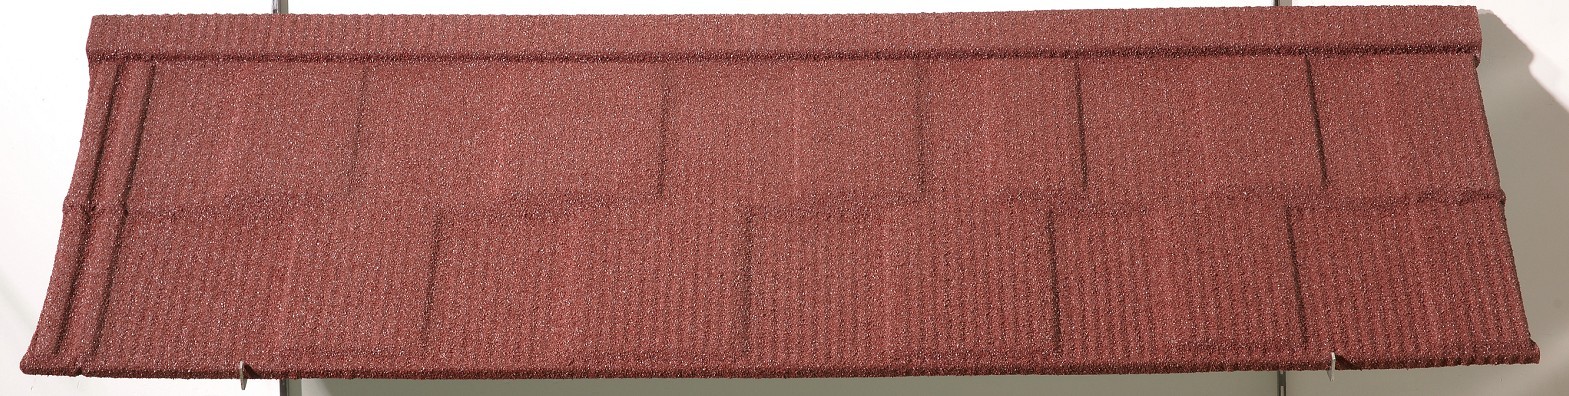 high-quality roof tiles accessories main for business for Warehouse-6